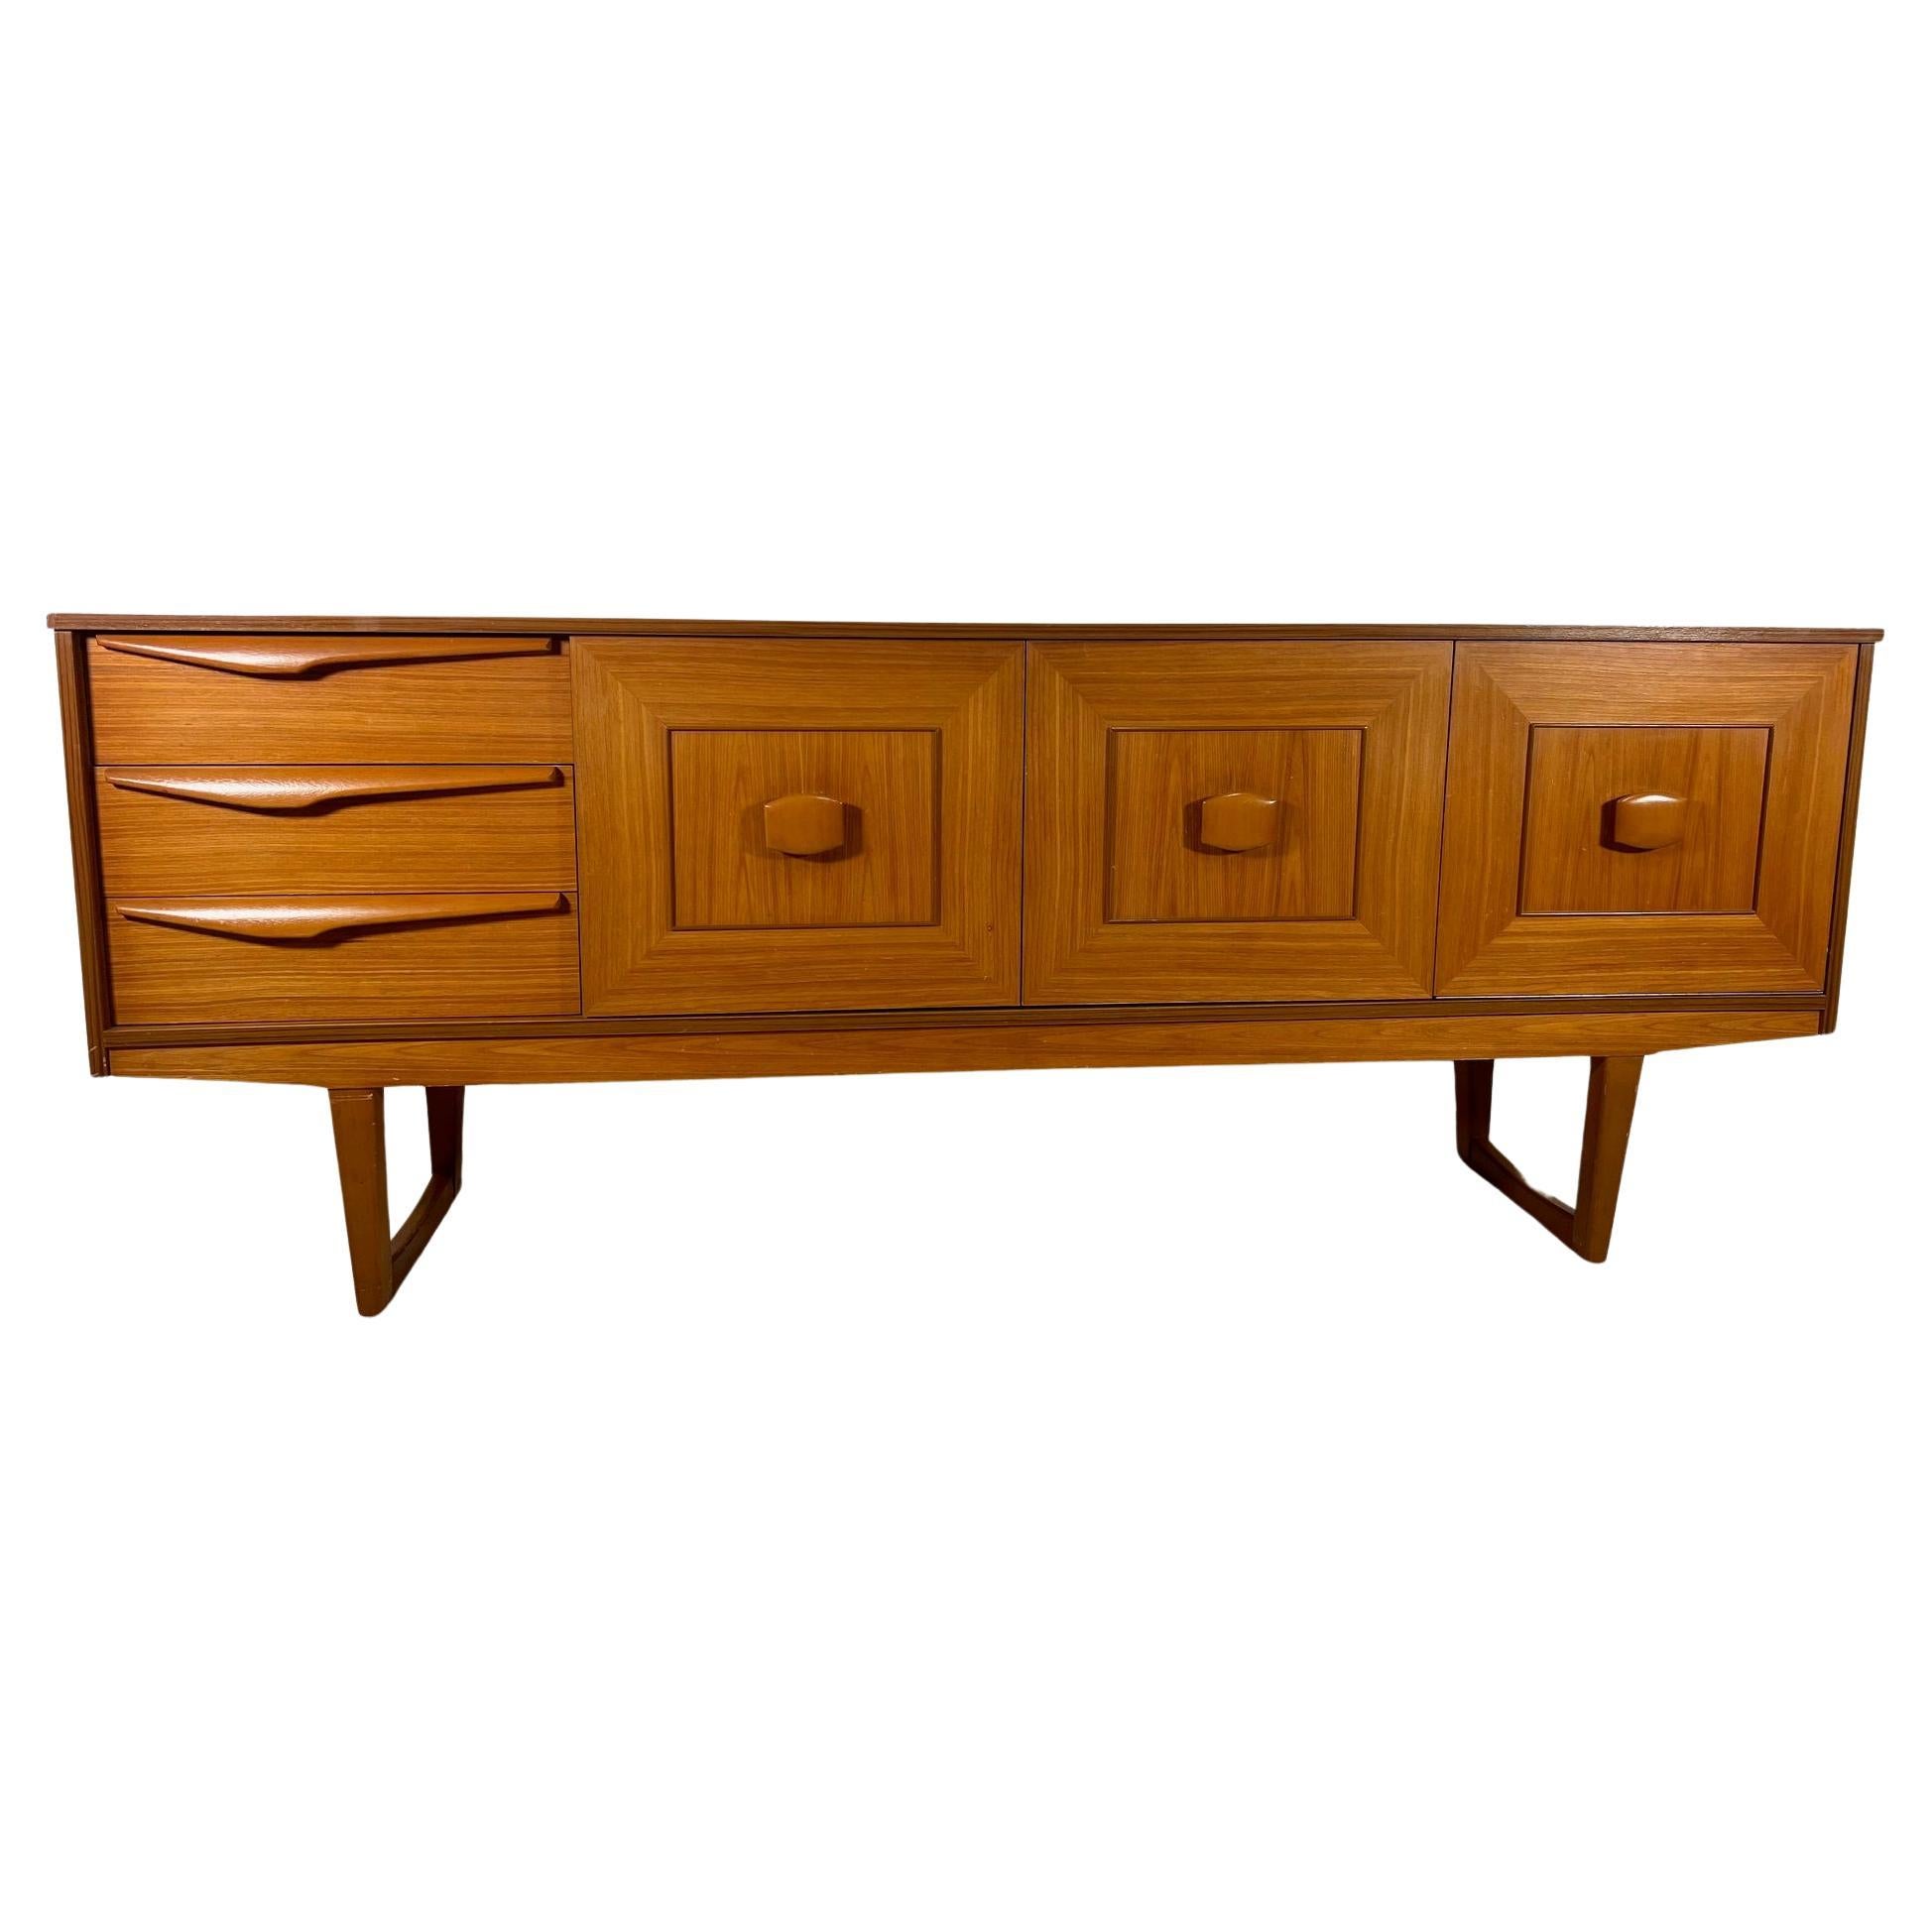 Midcentury Modern Teak Credenza by Stonehill Model Stateroom For Sale